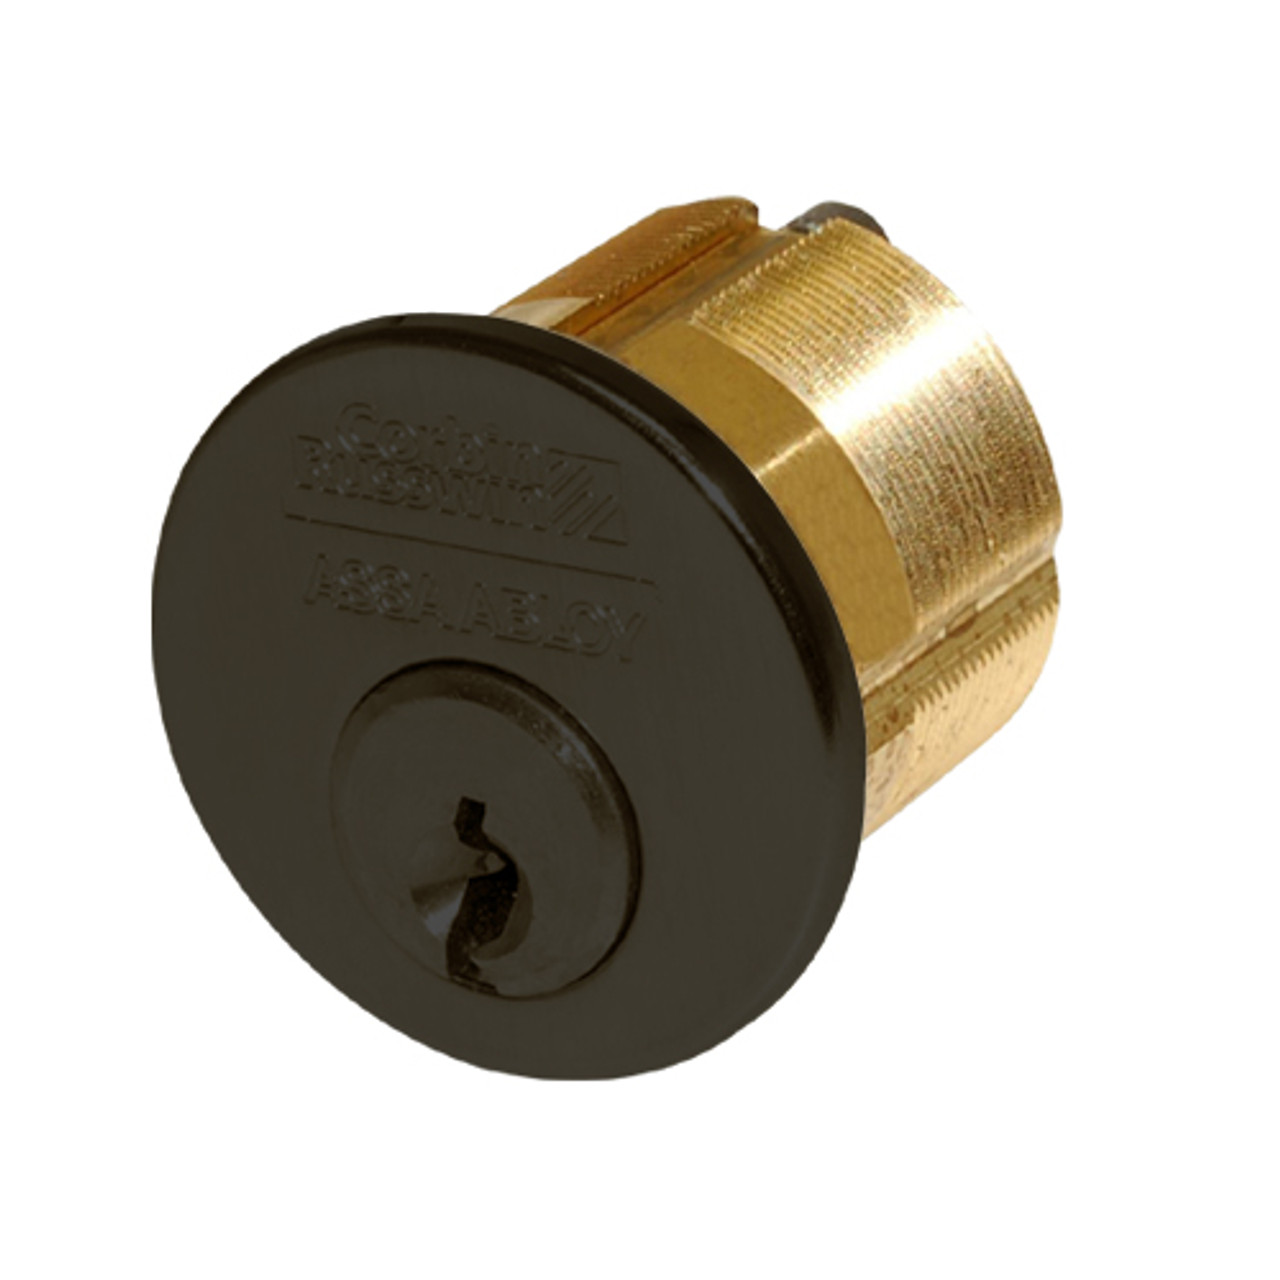 CR1000-138-A06-6-L1-613 Corbin Conventional Mortise Cylinder for Mortise Lock and DL3000 Deadlocks with Schlage L9000 Cam in Oil Rubbed Bronze Finish